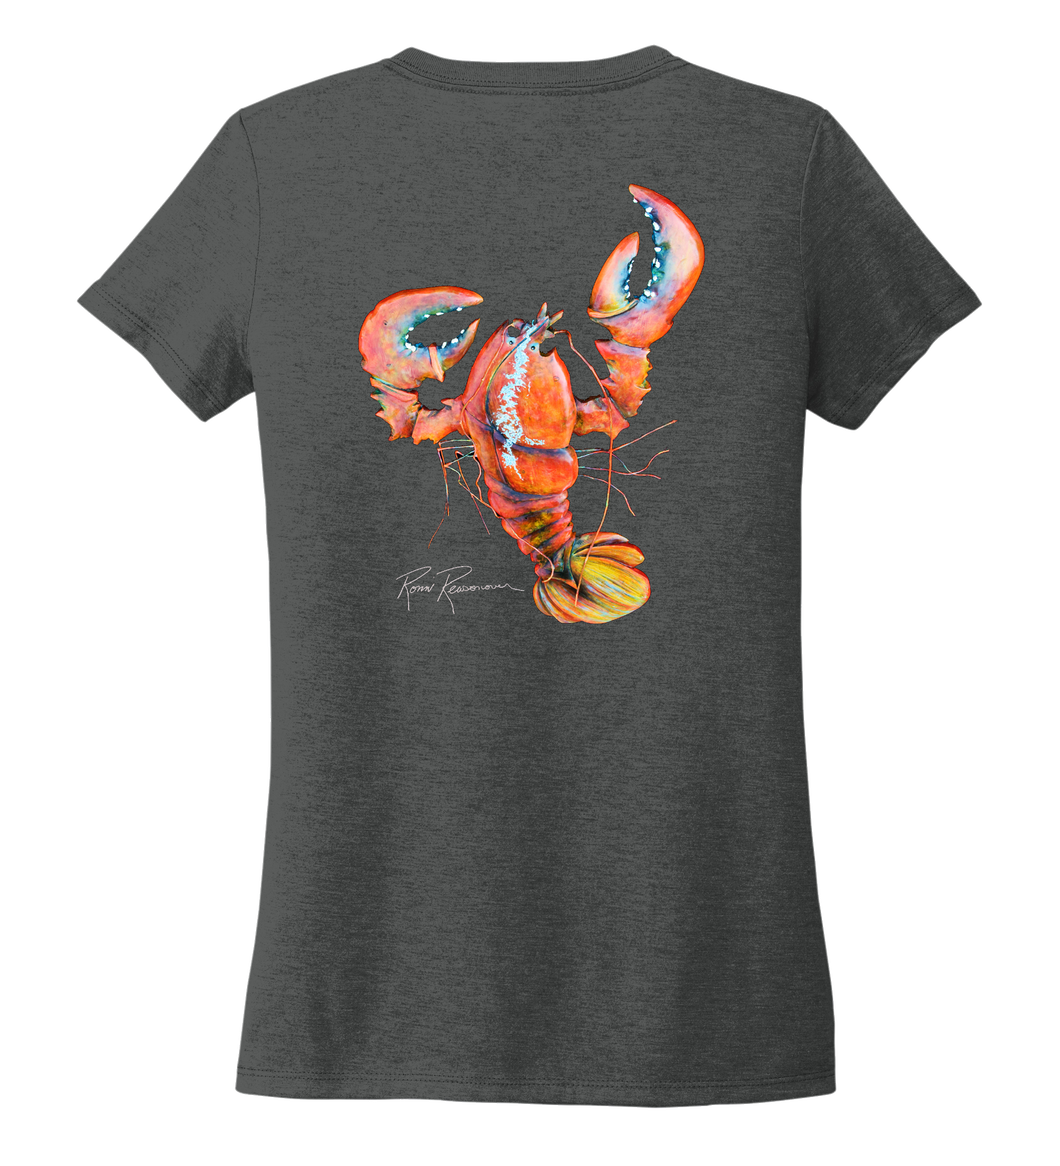 Ronnie Reasonover, The Lobster, Women's V-neck T-shirt in Slate Black